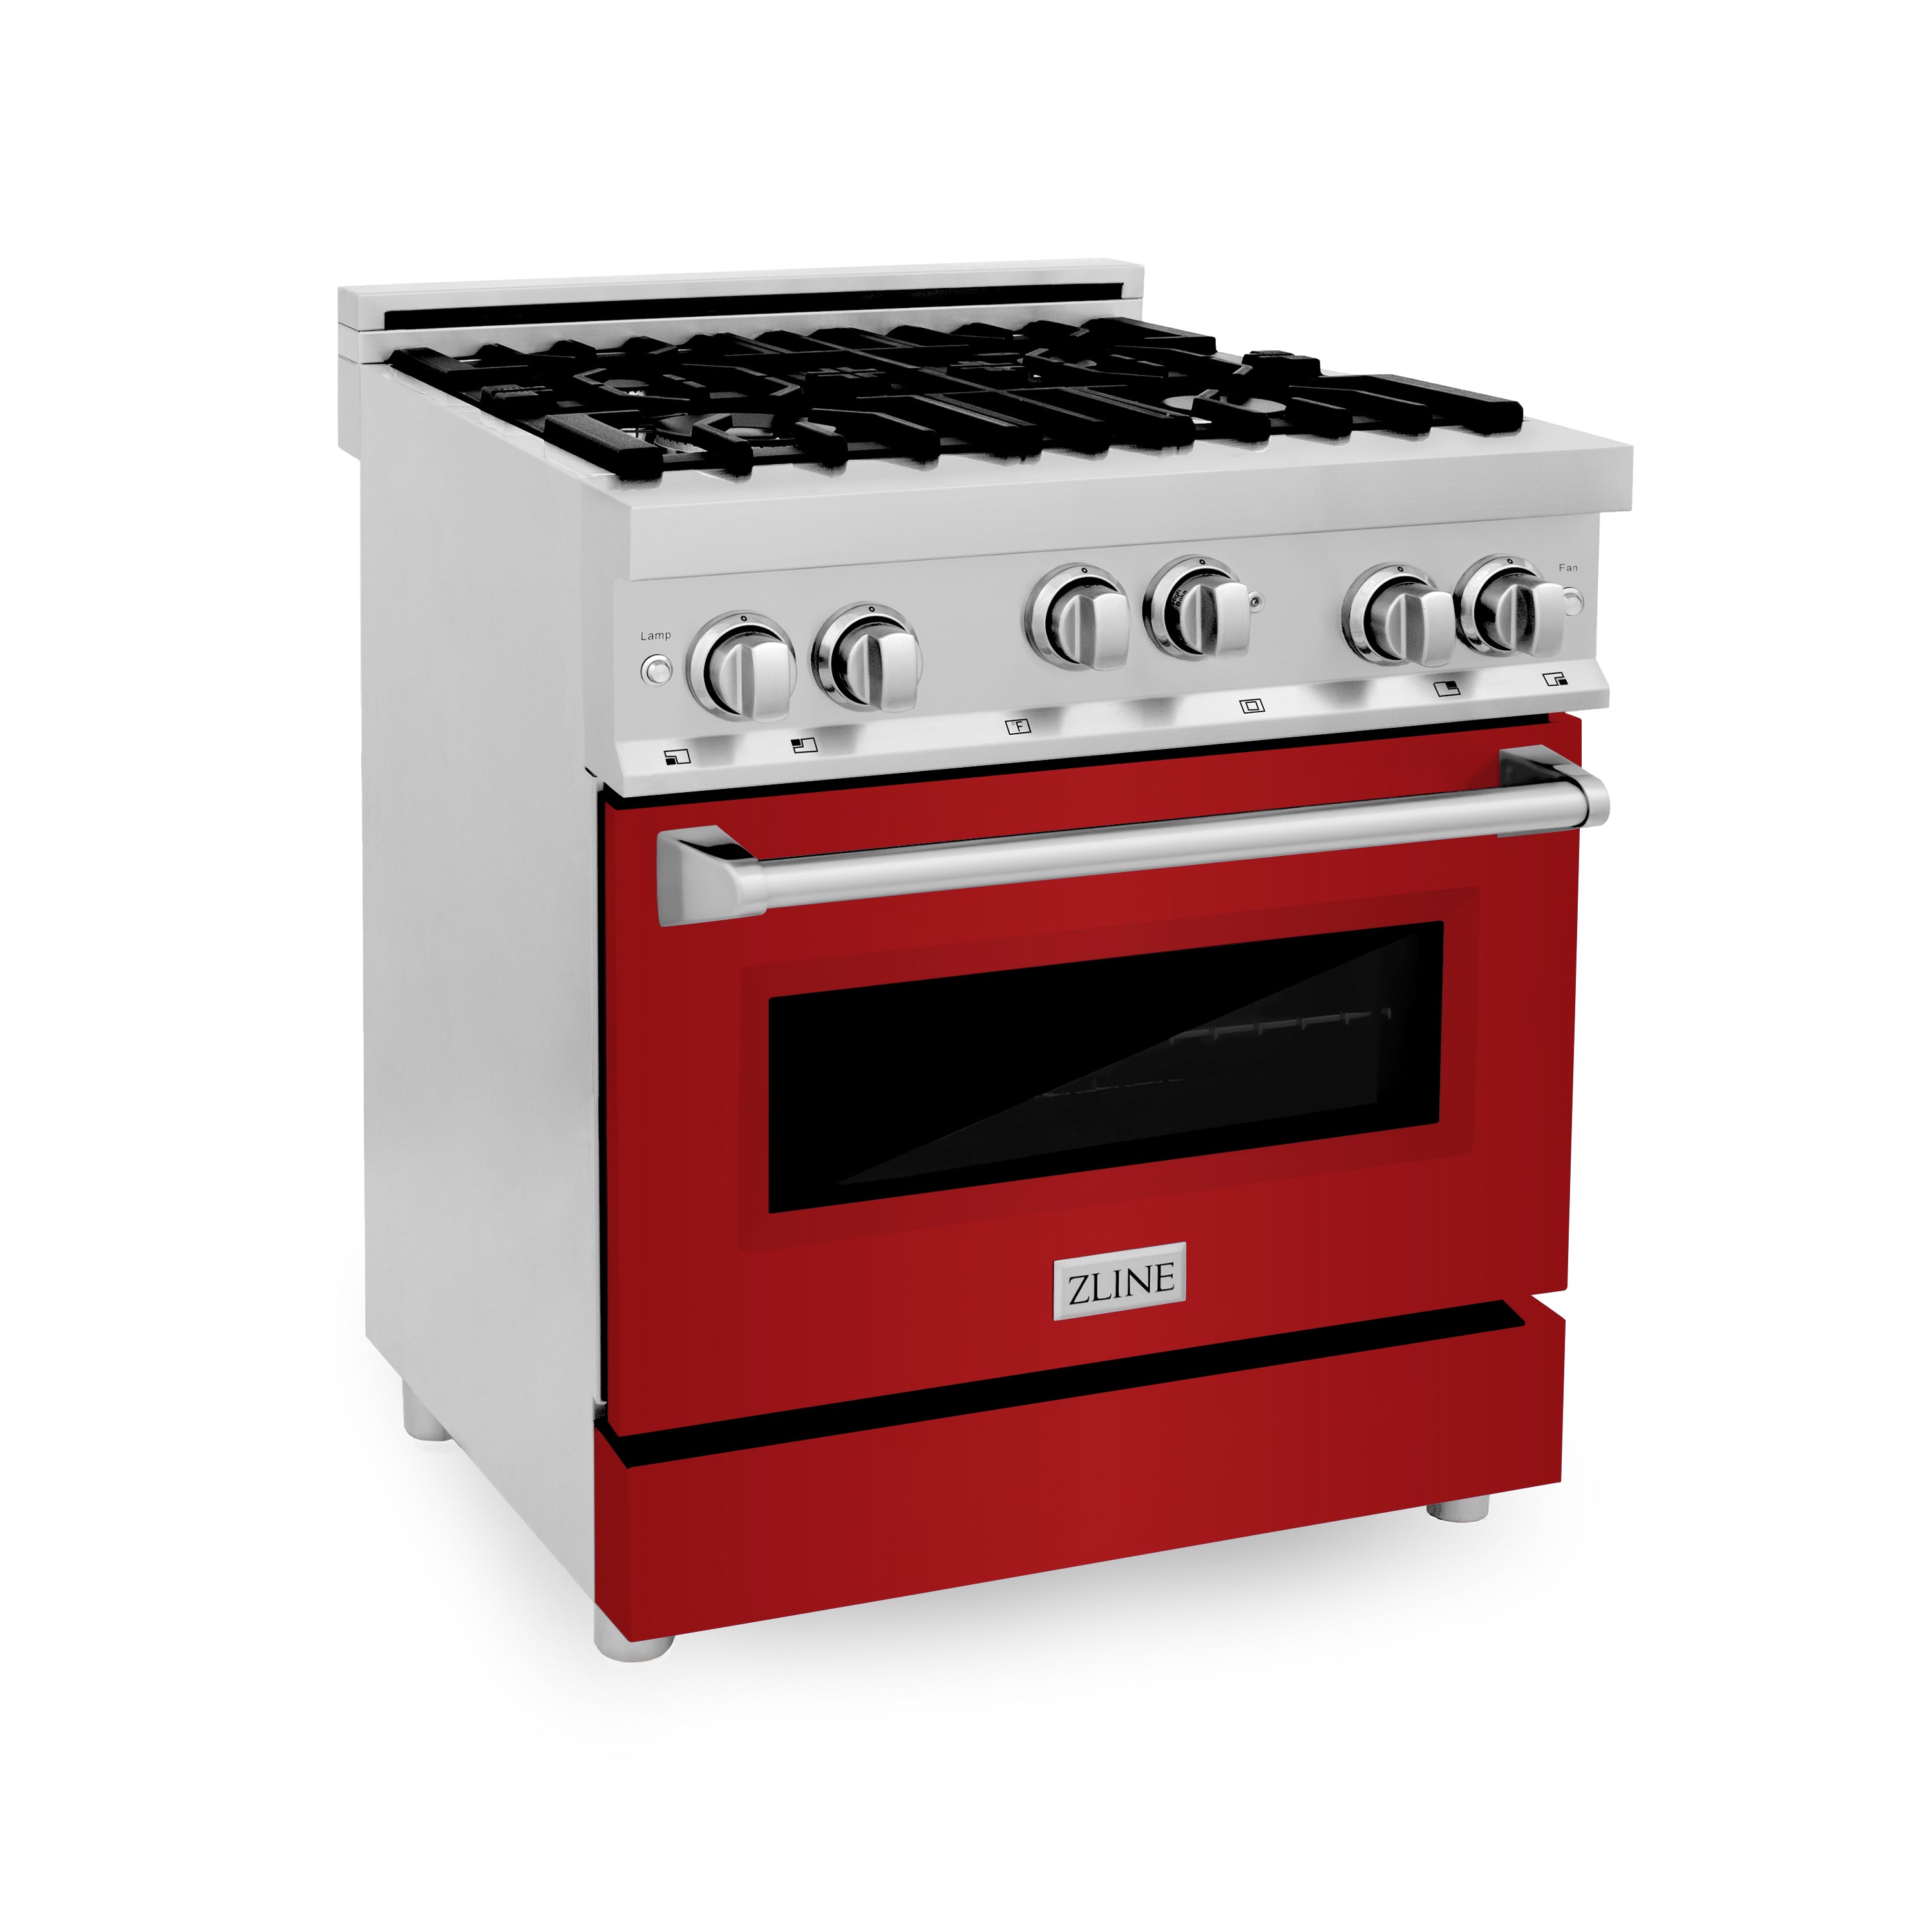 ZLINE 30" 4.0 cu. ft. Range with Gas Stove and Gas Oven in Stainless Steel (RG30)